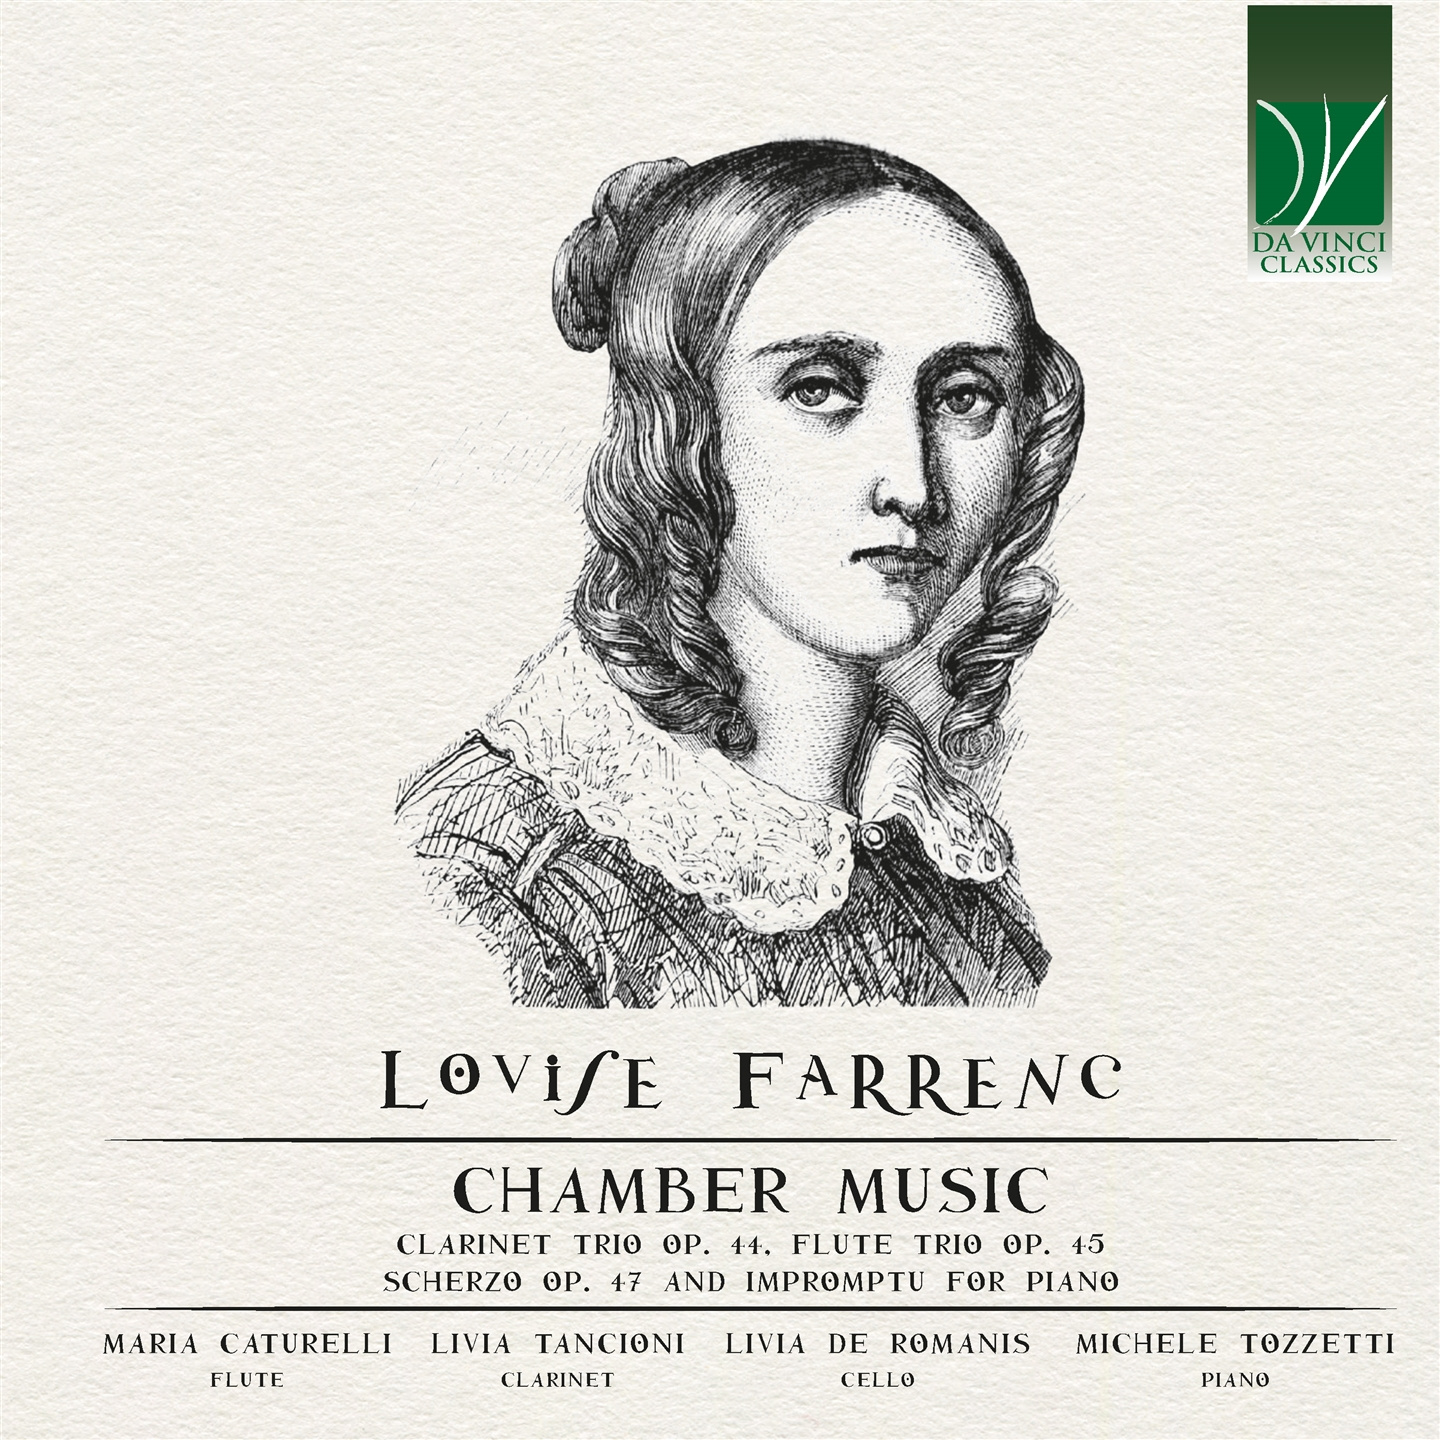 LOUISE FARRENC: CHAMBER MUSIC (CLARINET TRIO OP. 44, FLUTE TRIO OP. 45, PIANO M